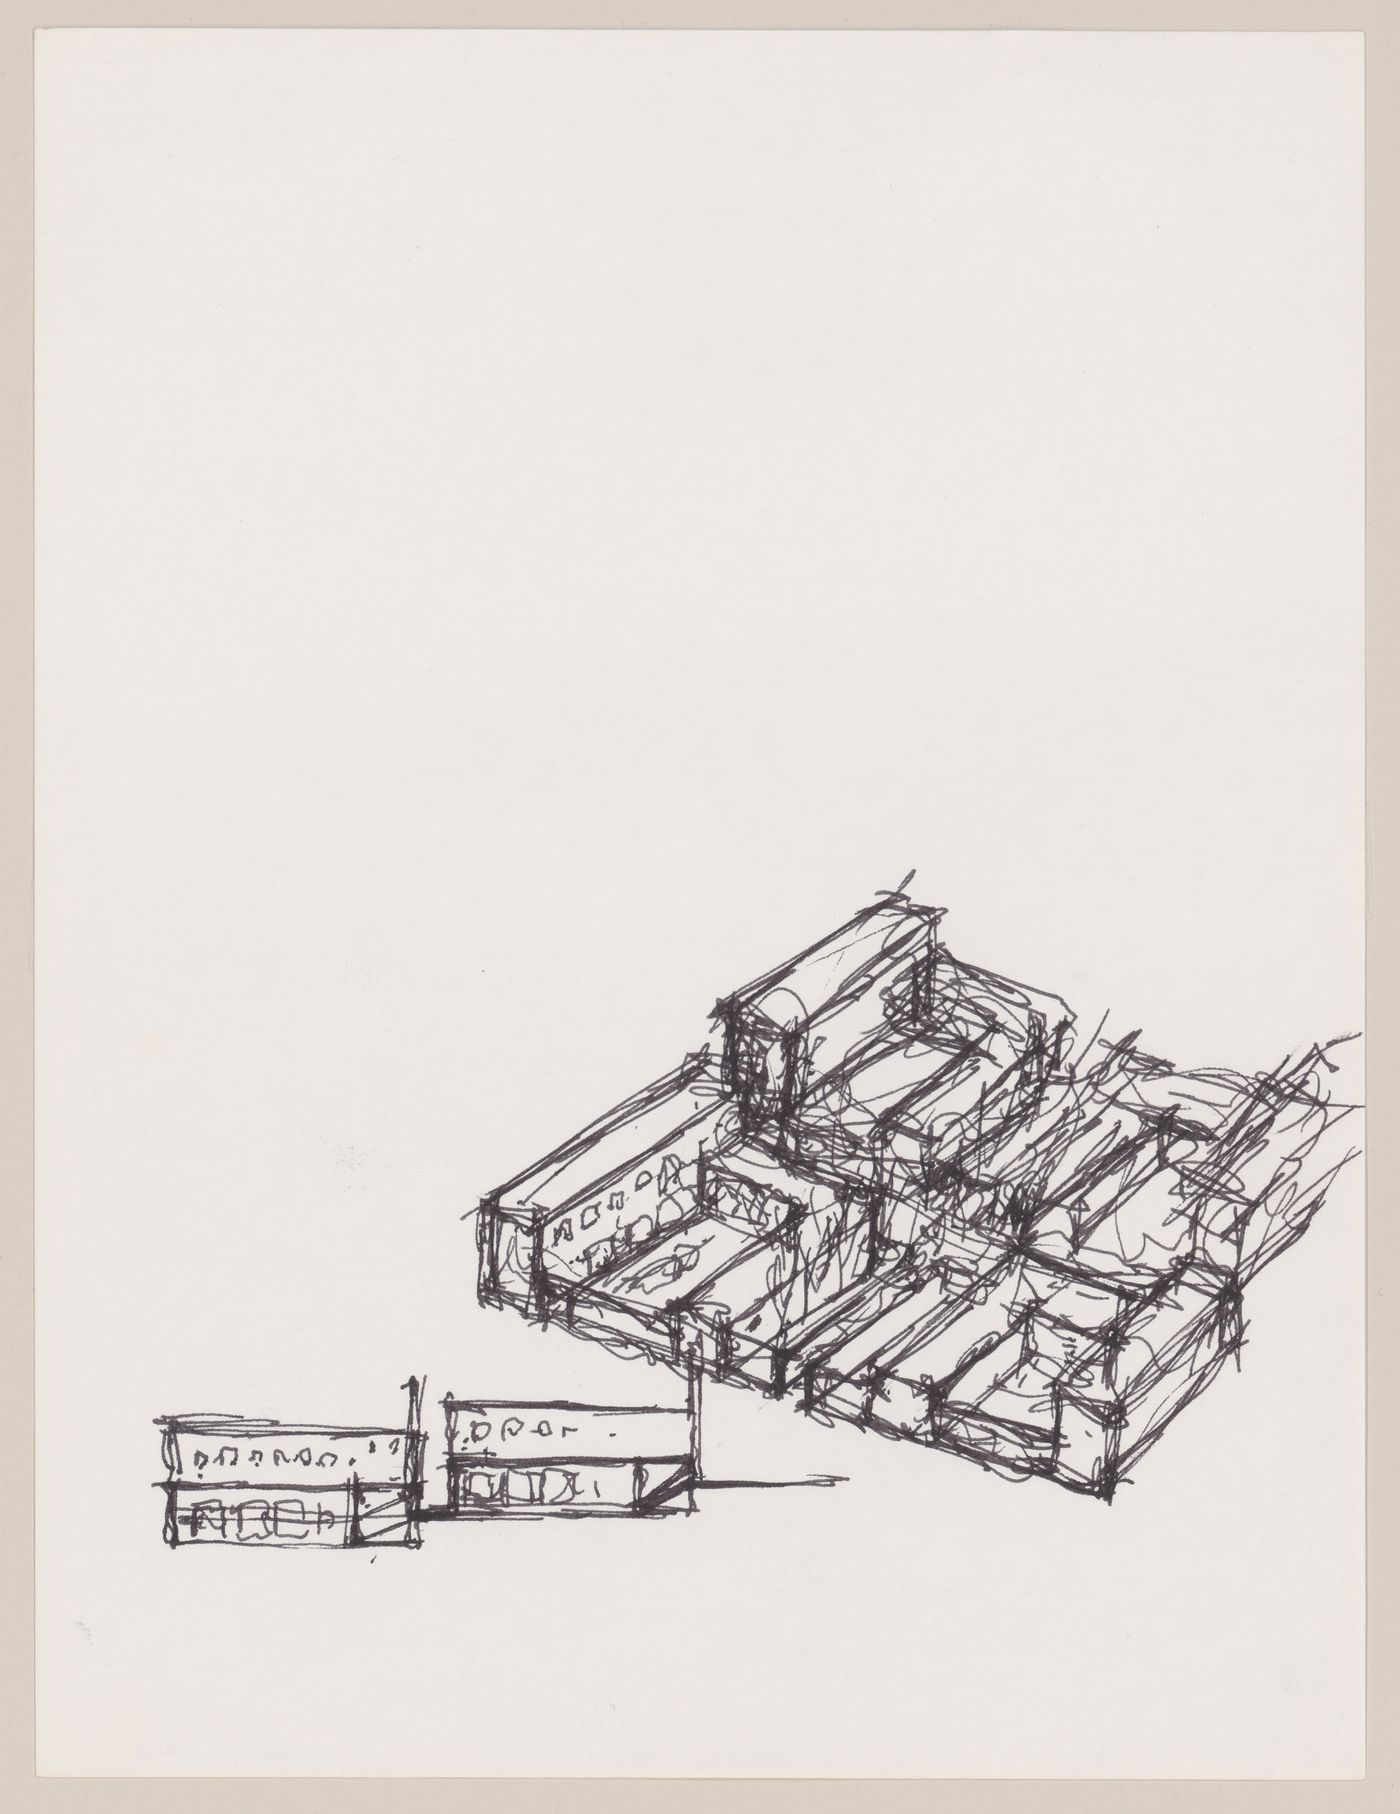 Sketch axonometric and elevations for Victims II